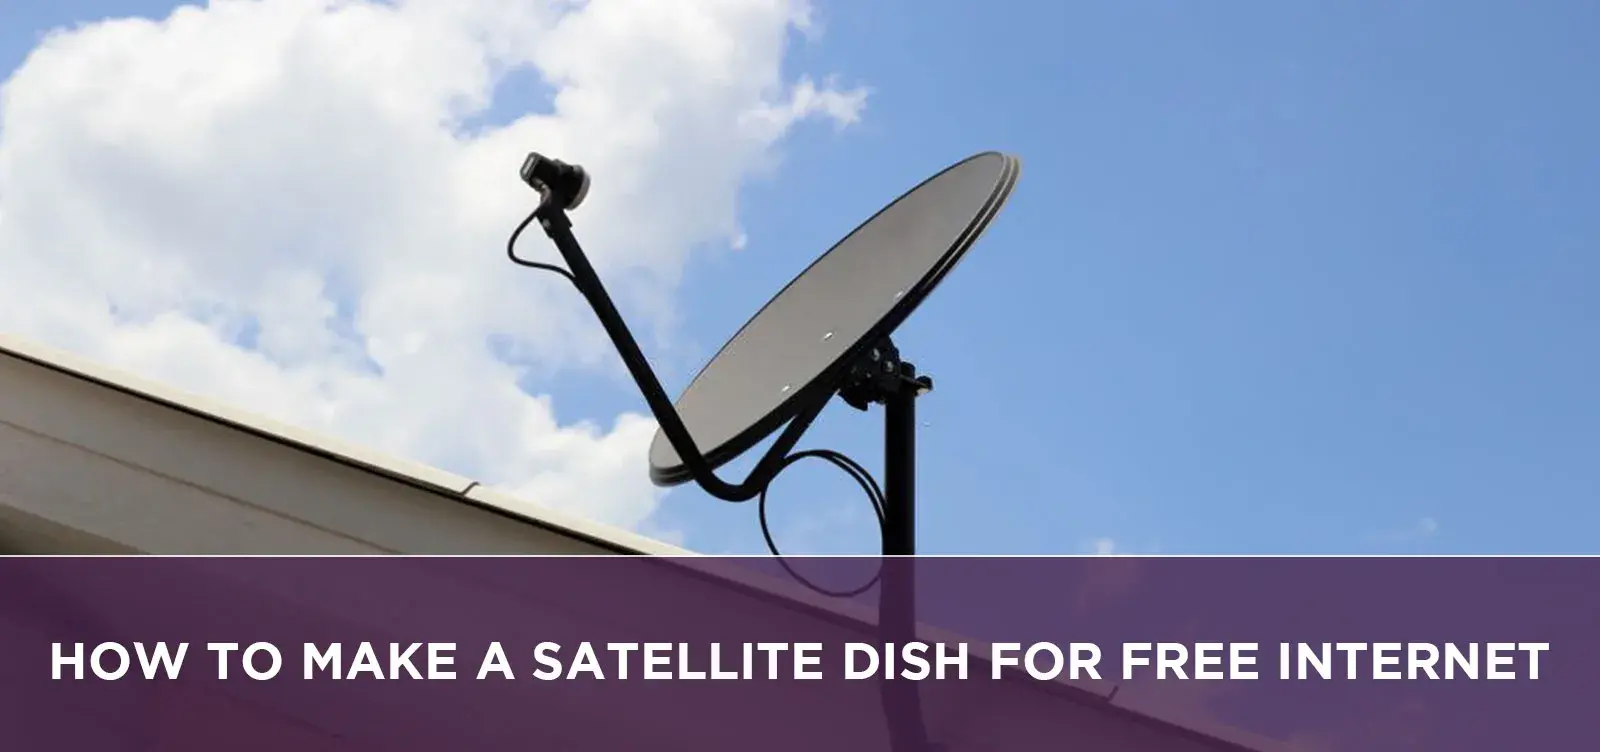 How To Make A Satellite Dish For Free Internet?